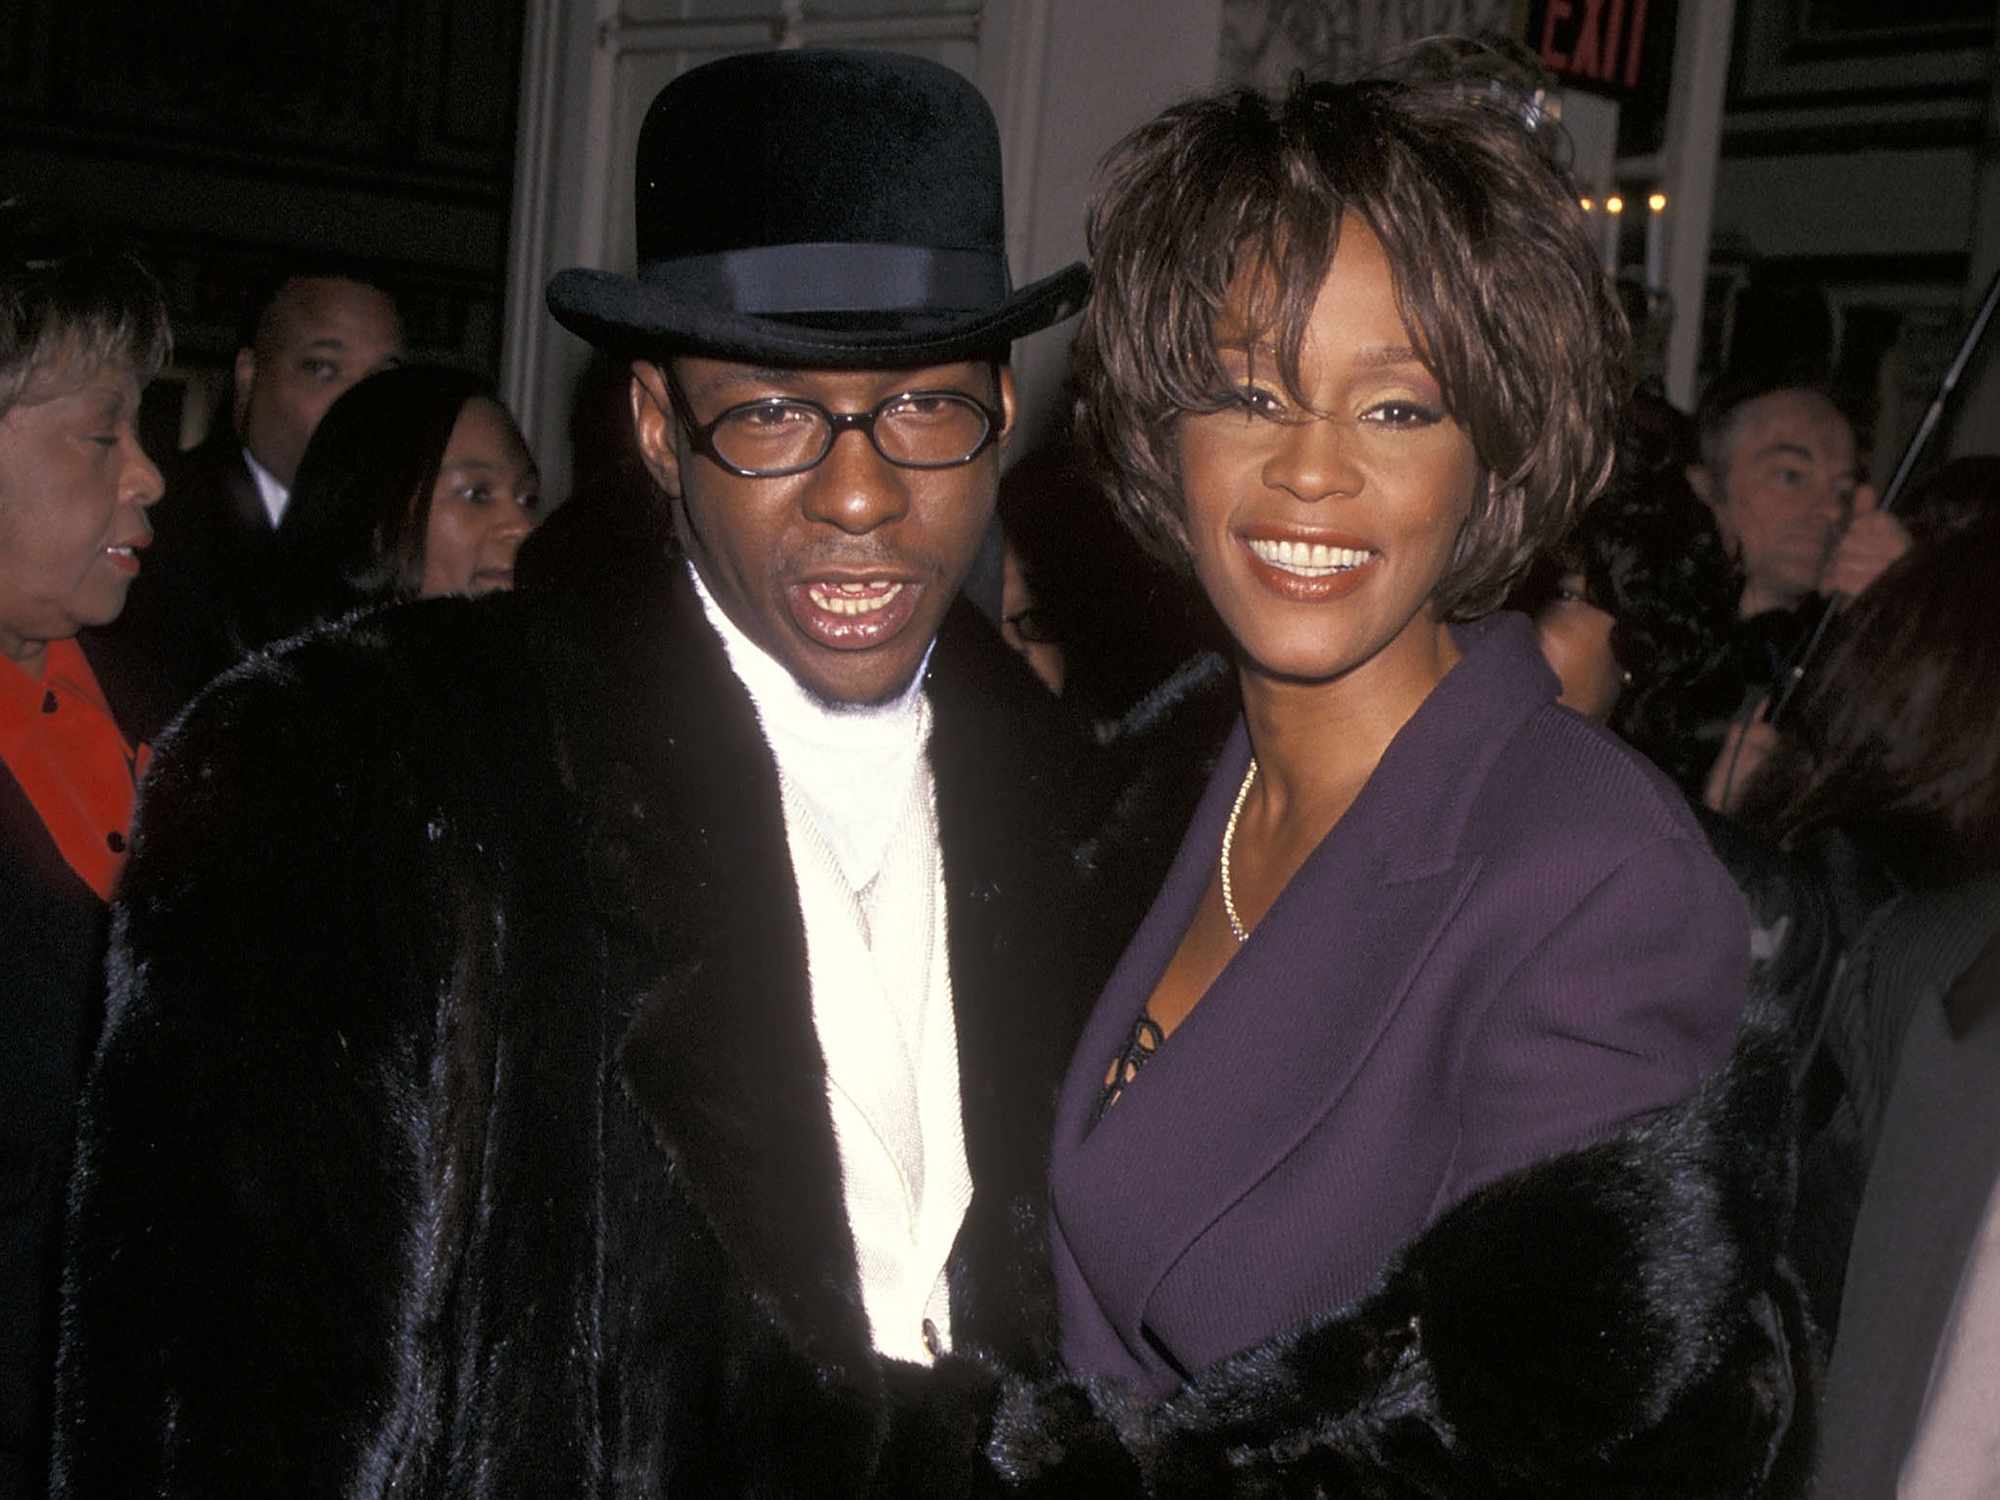 Bobby Brown and singer Whitney Houston attend the 40th Annual Grammy Awards Pre-Party Hosted by Clive Davis on February 24, 1998 at The Plaza Hotel in New York City